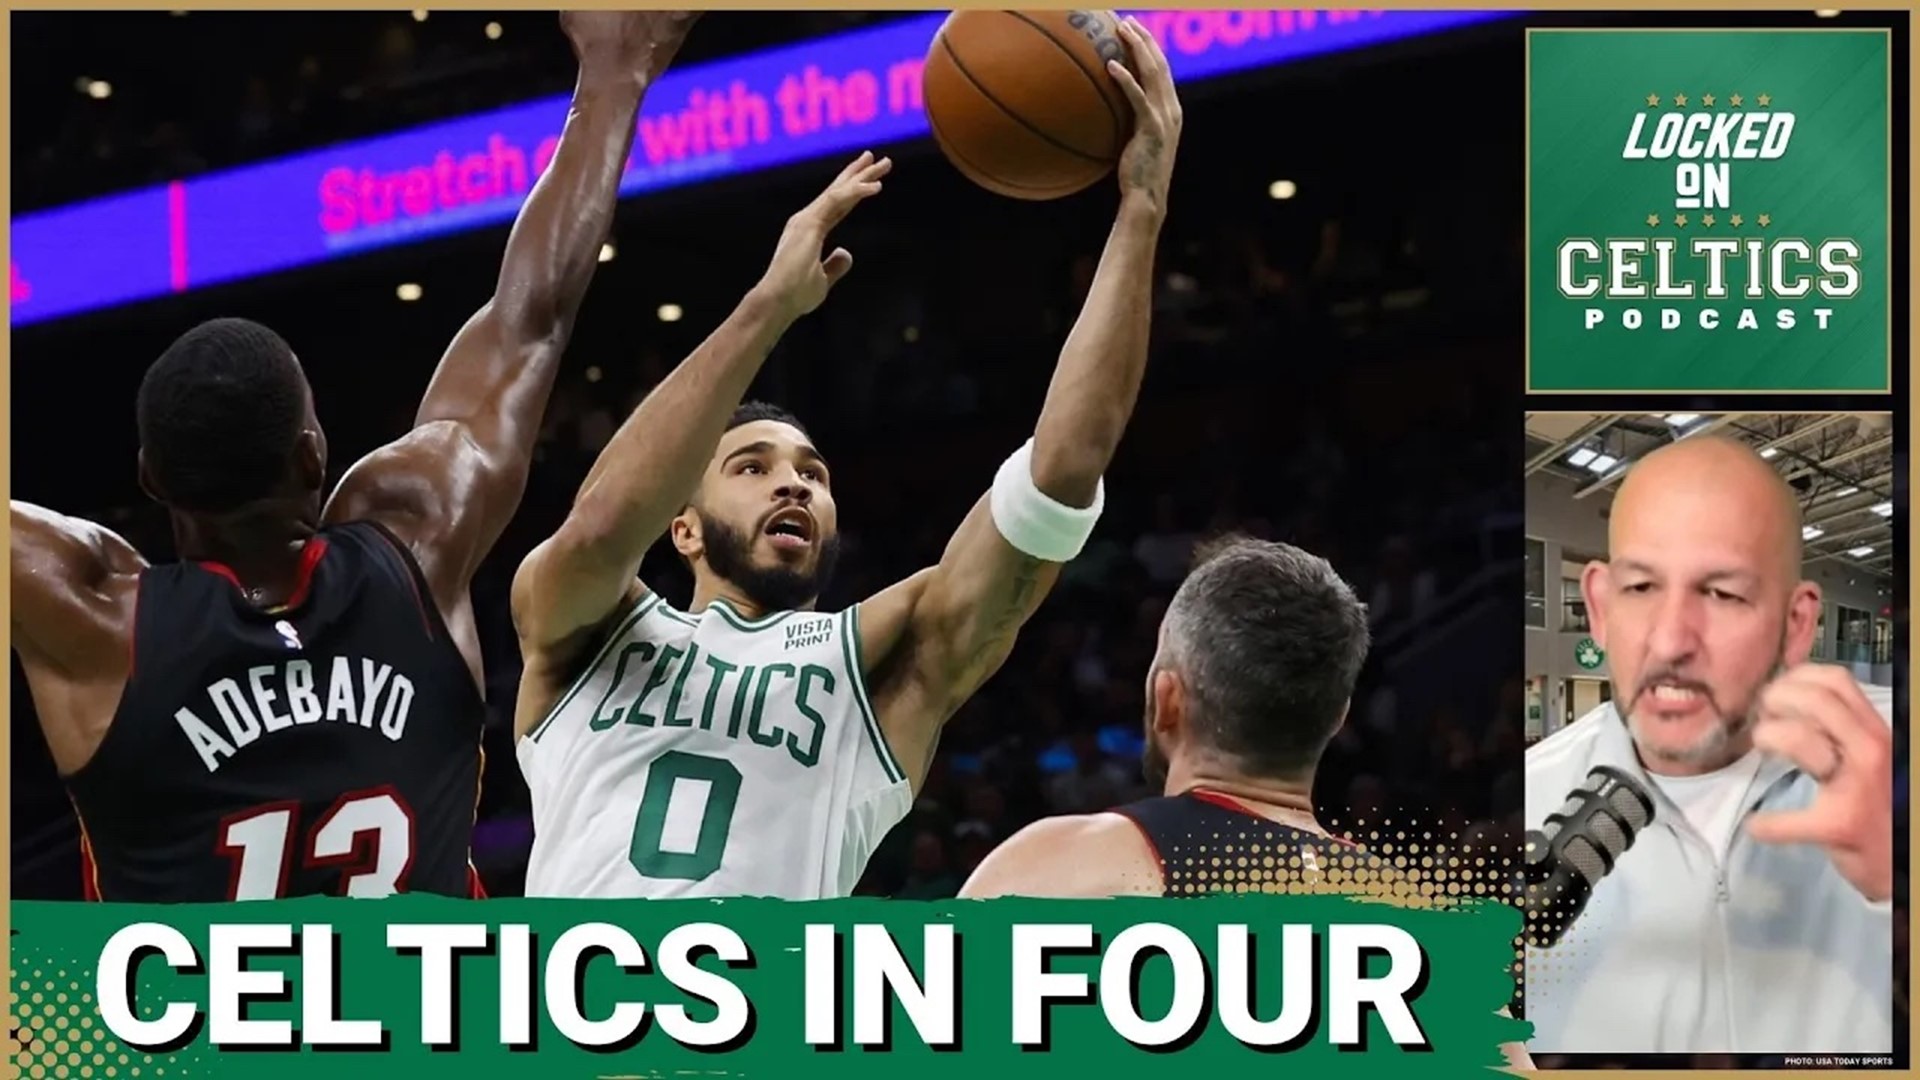 It'll be Celtics-Heat again, this time in the first round of the playoffs. Does Miami have any chance? What does Boston have to do to win this easily?